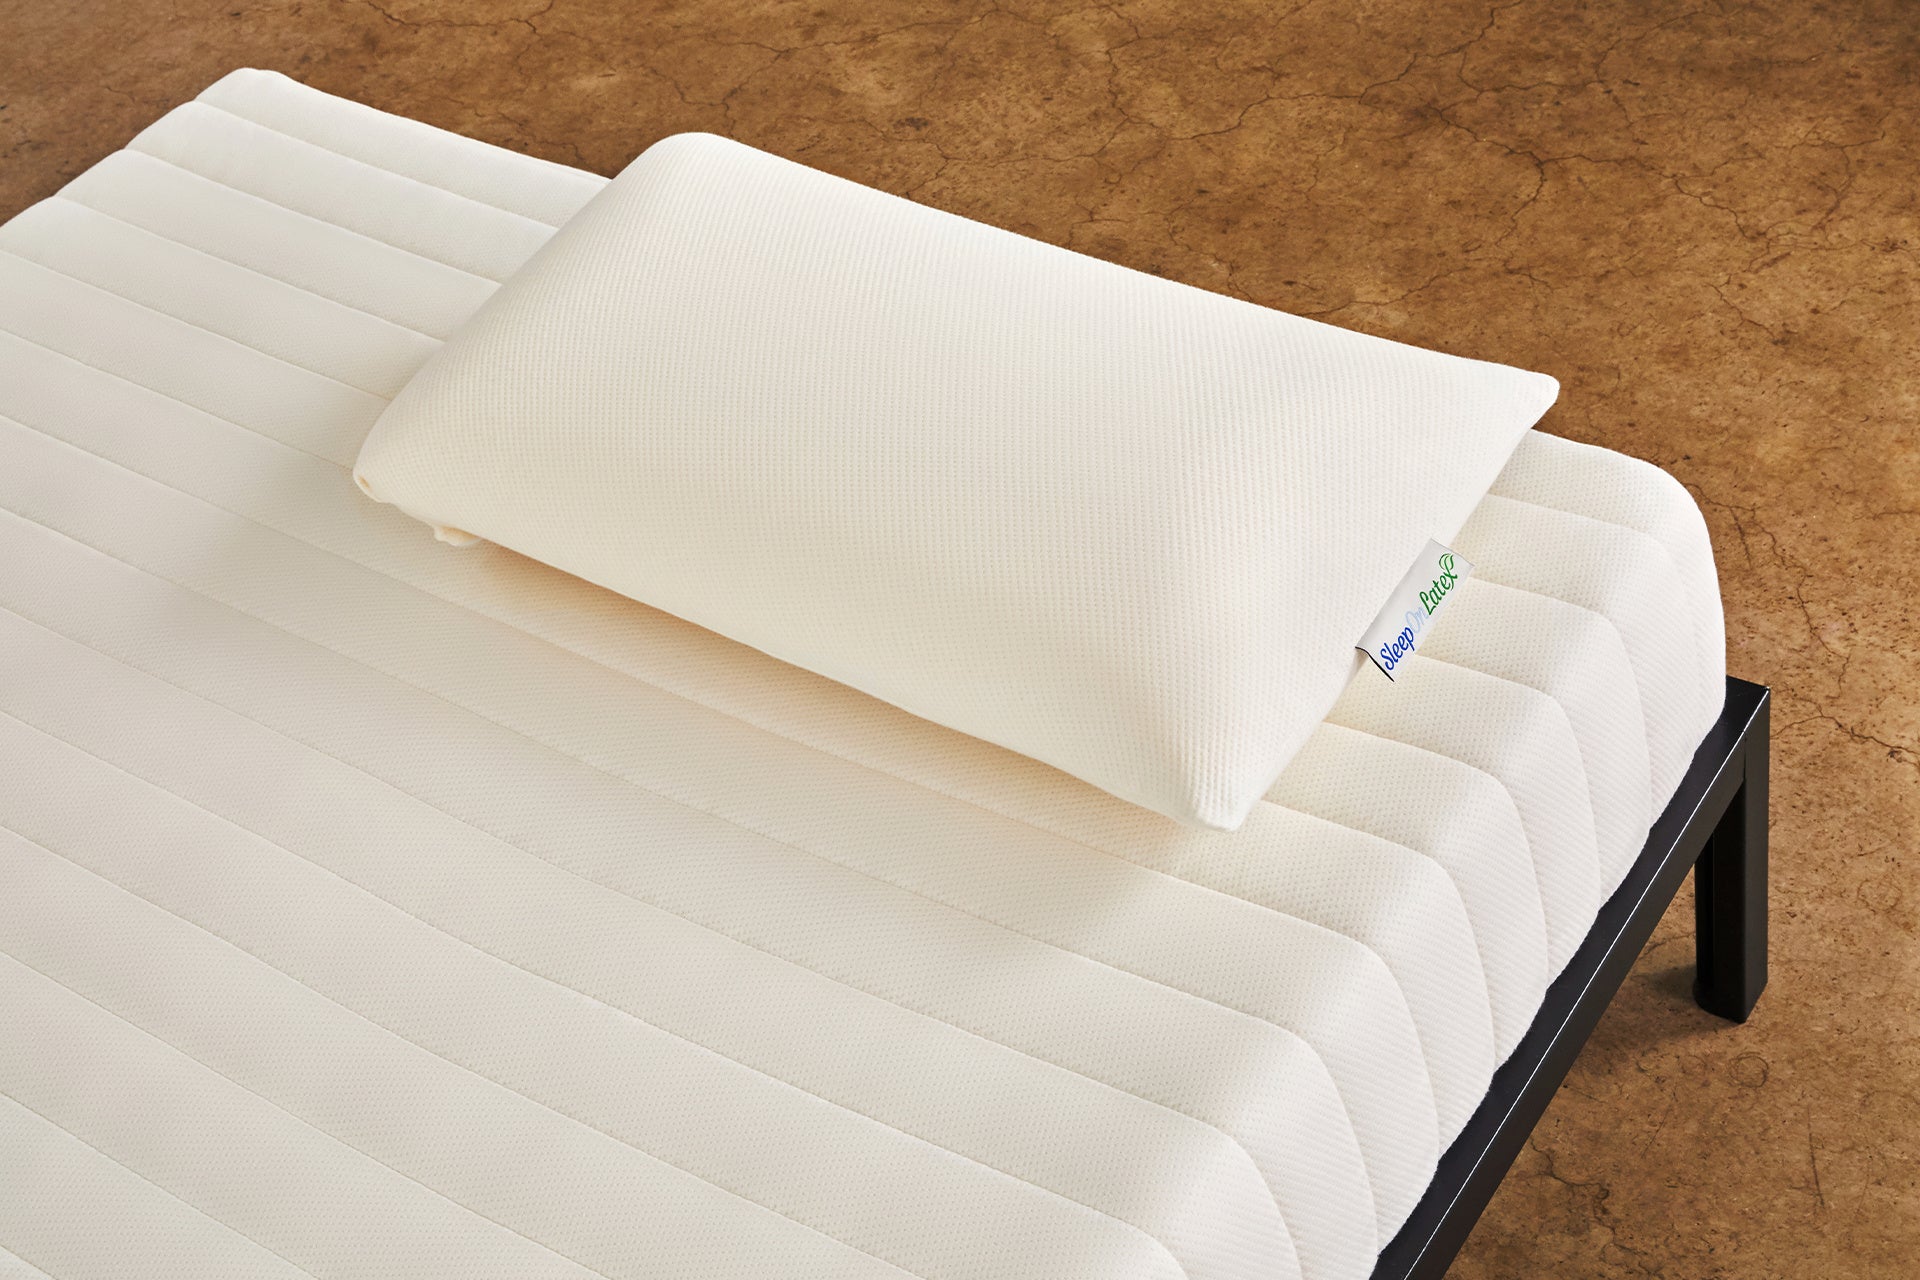 What are the top 3 reasons to sleep on a soft latex pillow?